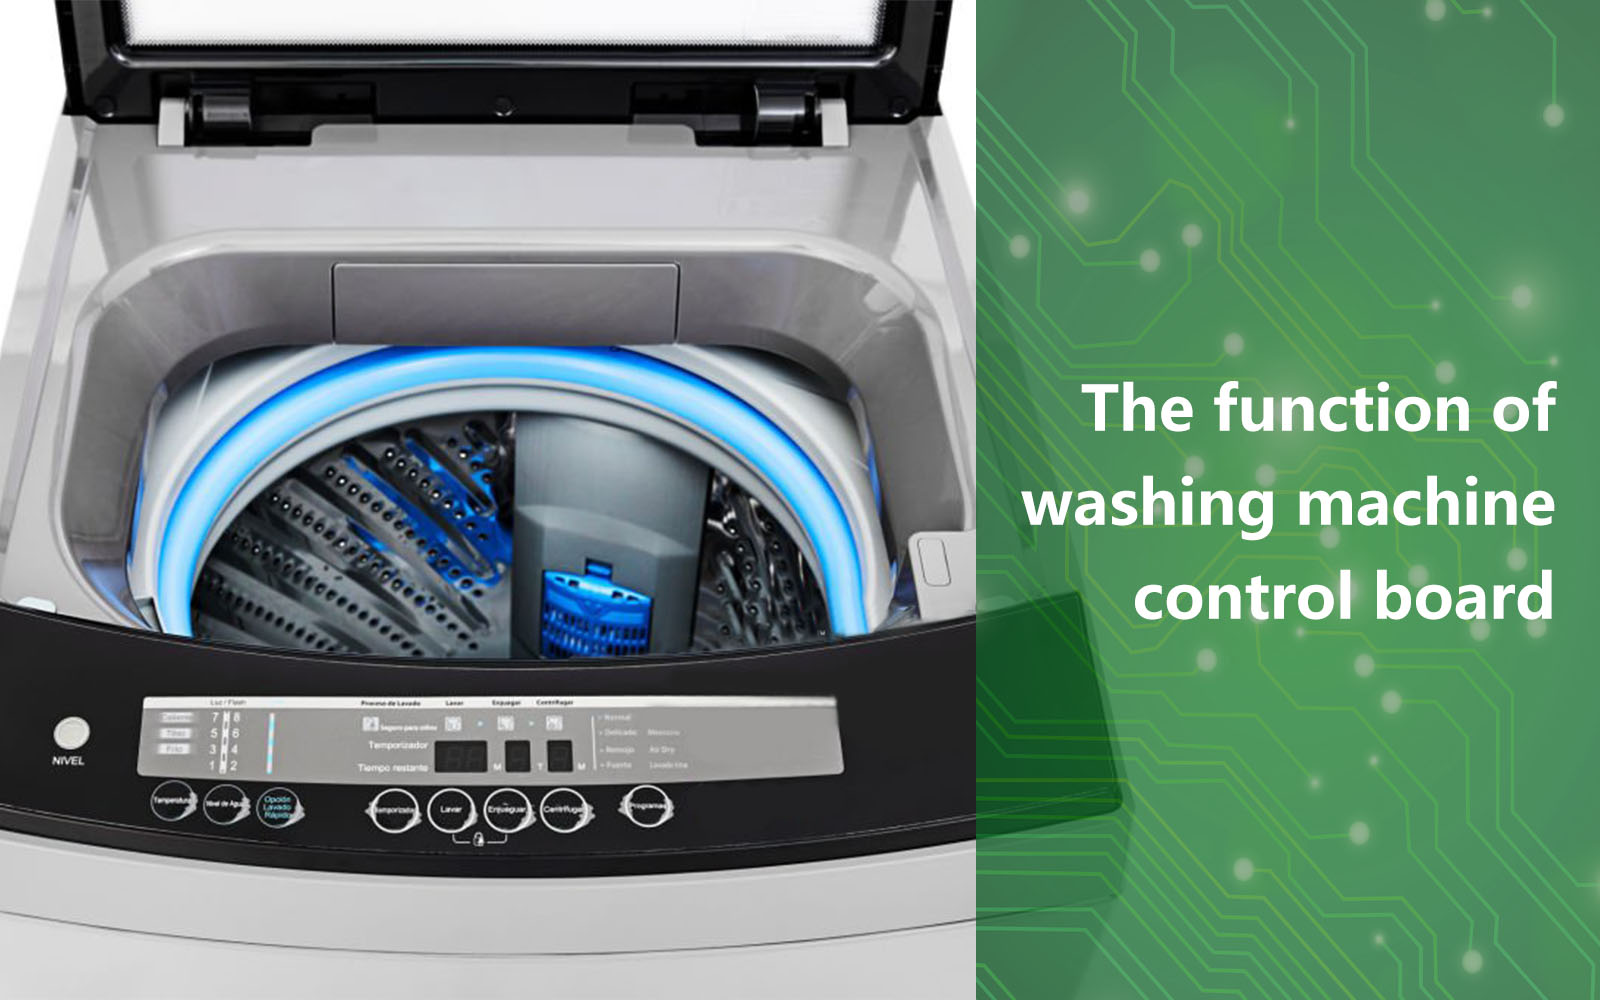 The function of washing machine control board